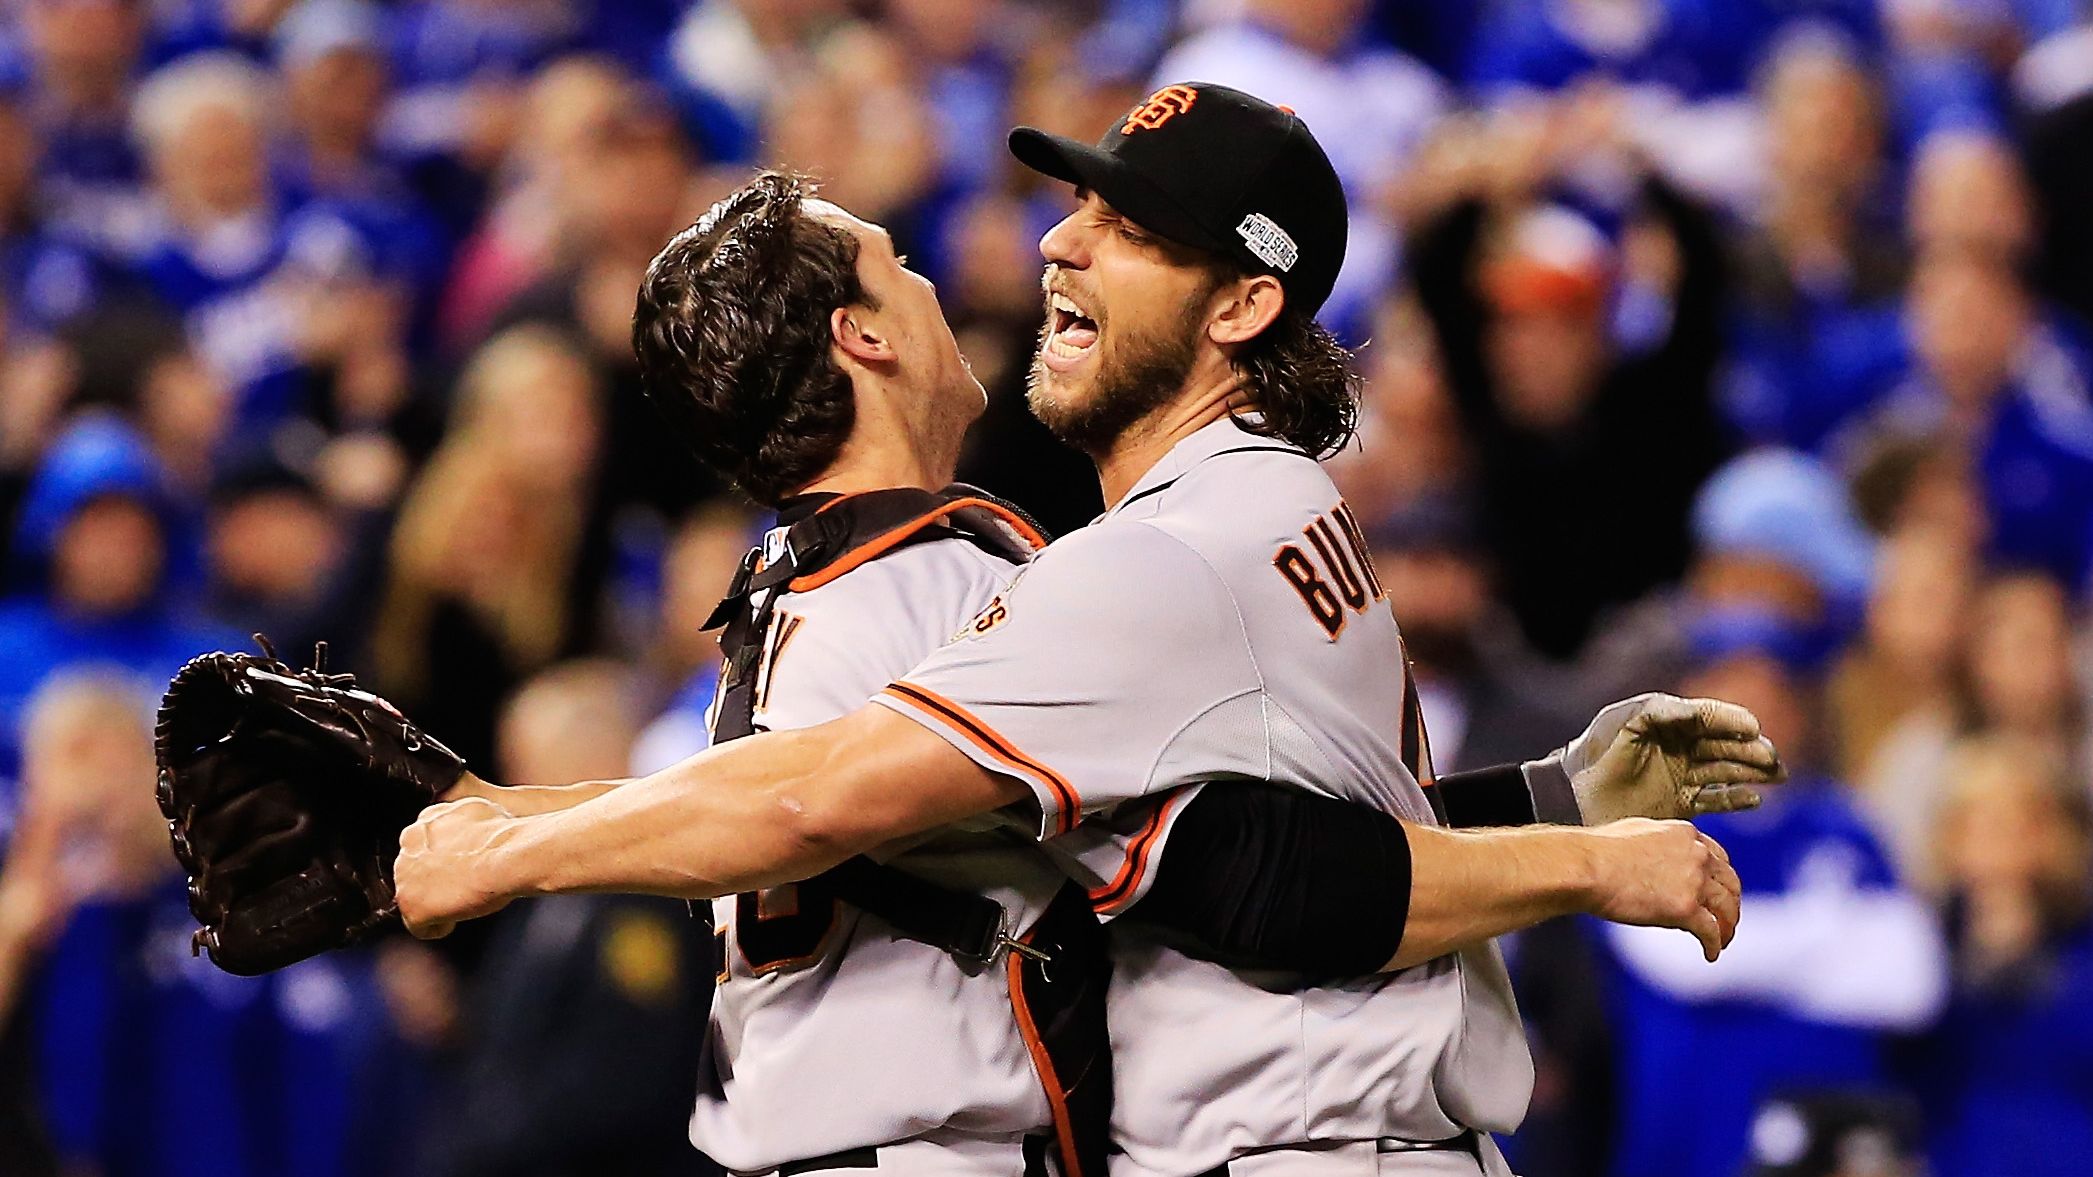 Madison Bumgarner reveals rodeo hobby - 'Just part of who you are